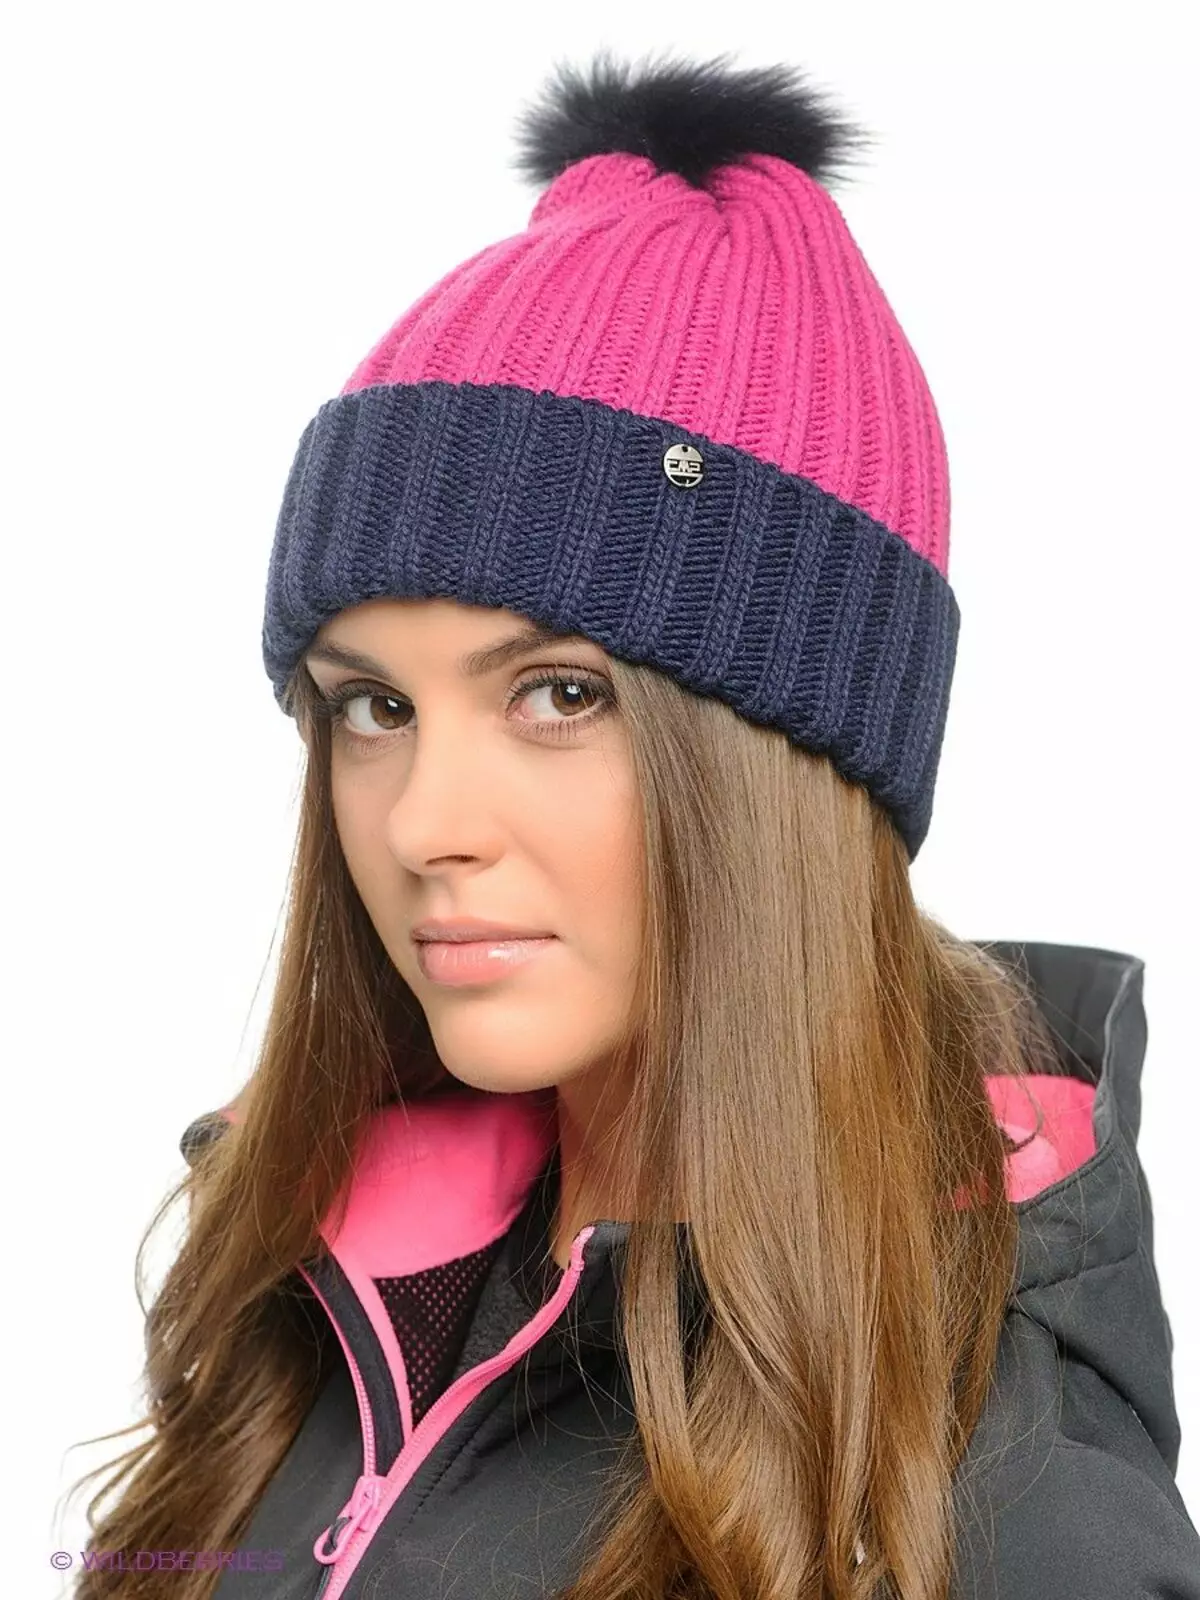 Women's caps (318 photos): Trendy 2021-2022 with Pompon, for women after 40-50 years, branded, how to choose for a round face 2999_197